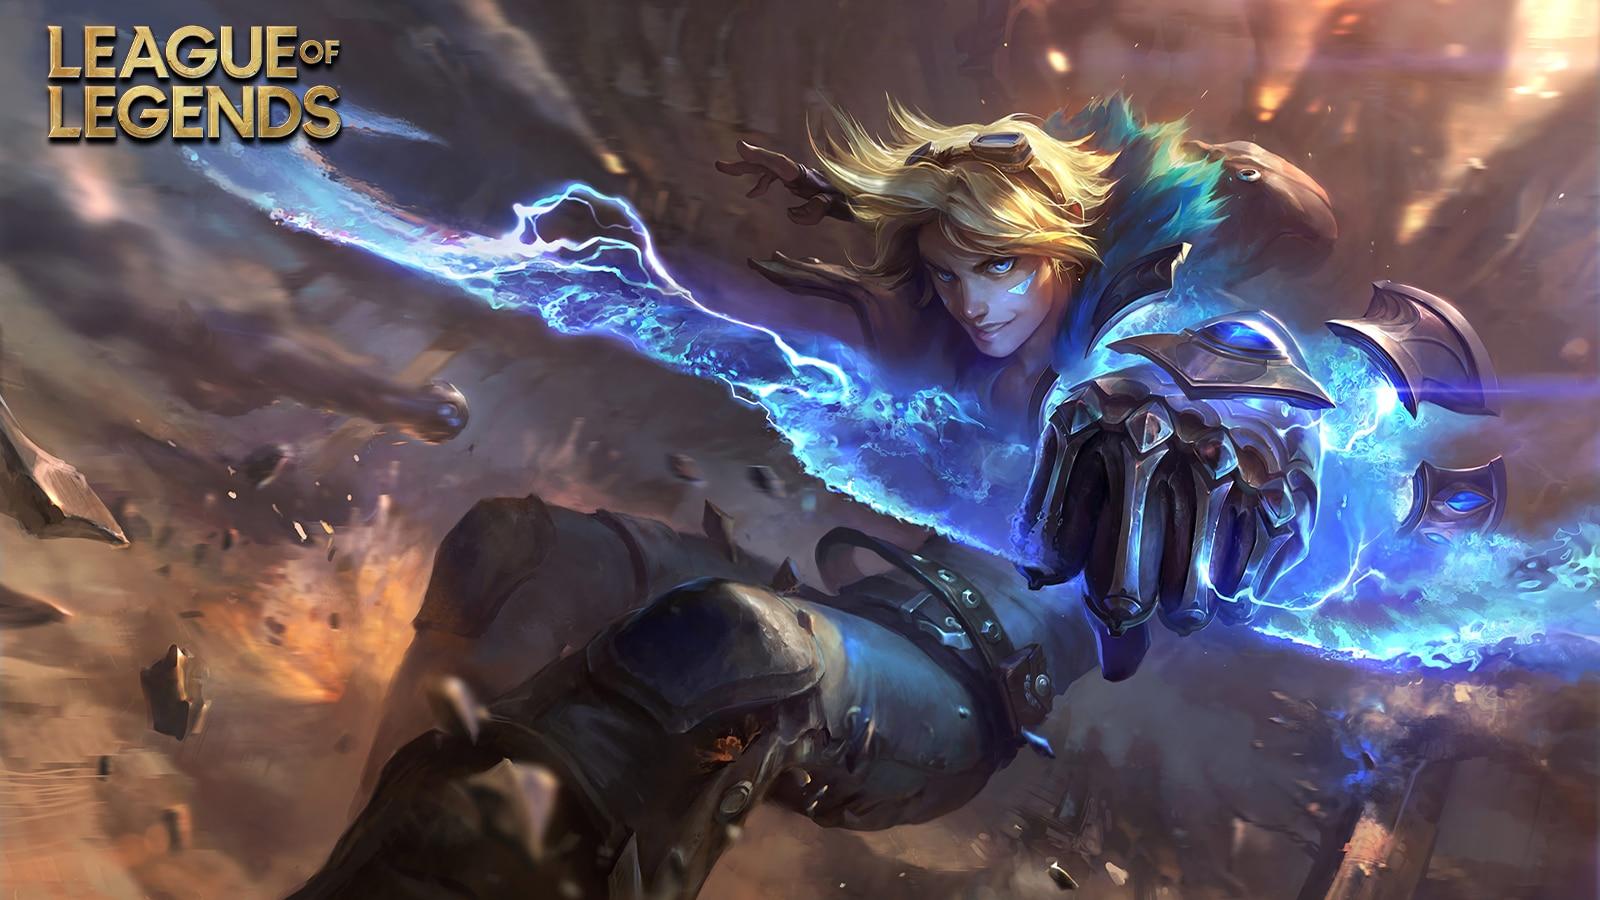 Here are all Prime Gaming exclusive rewards for LoL, VALORANT, TFT